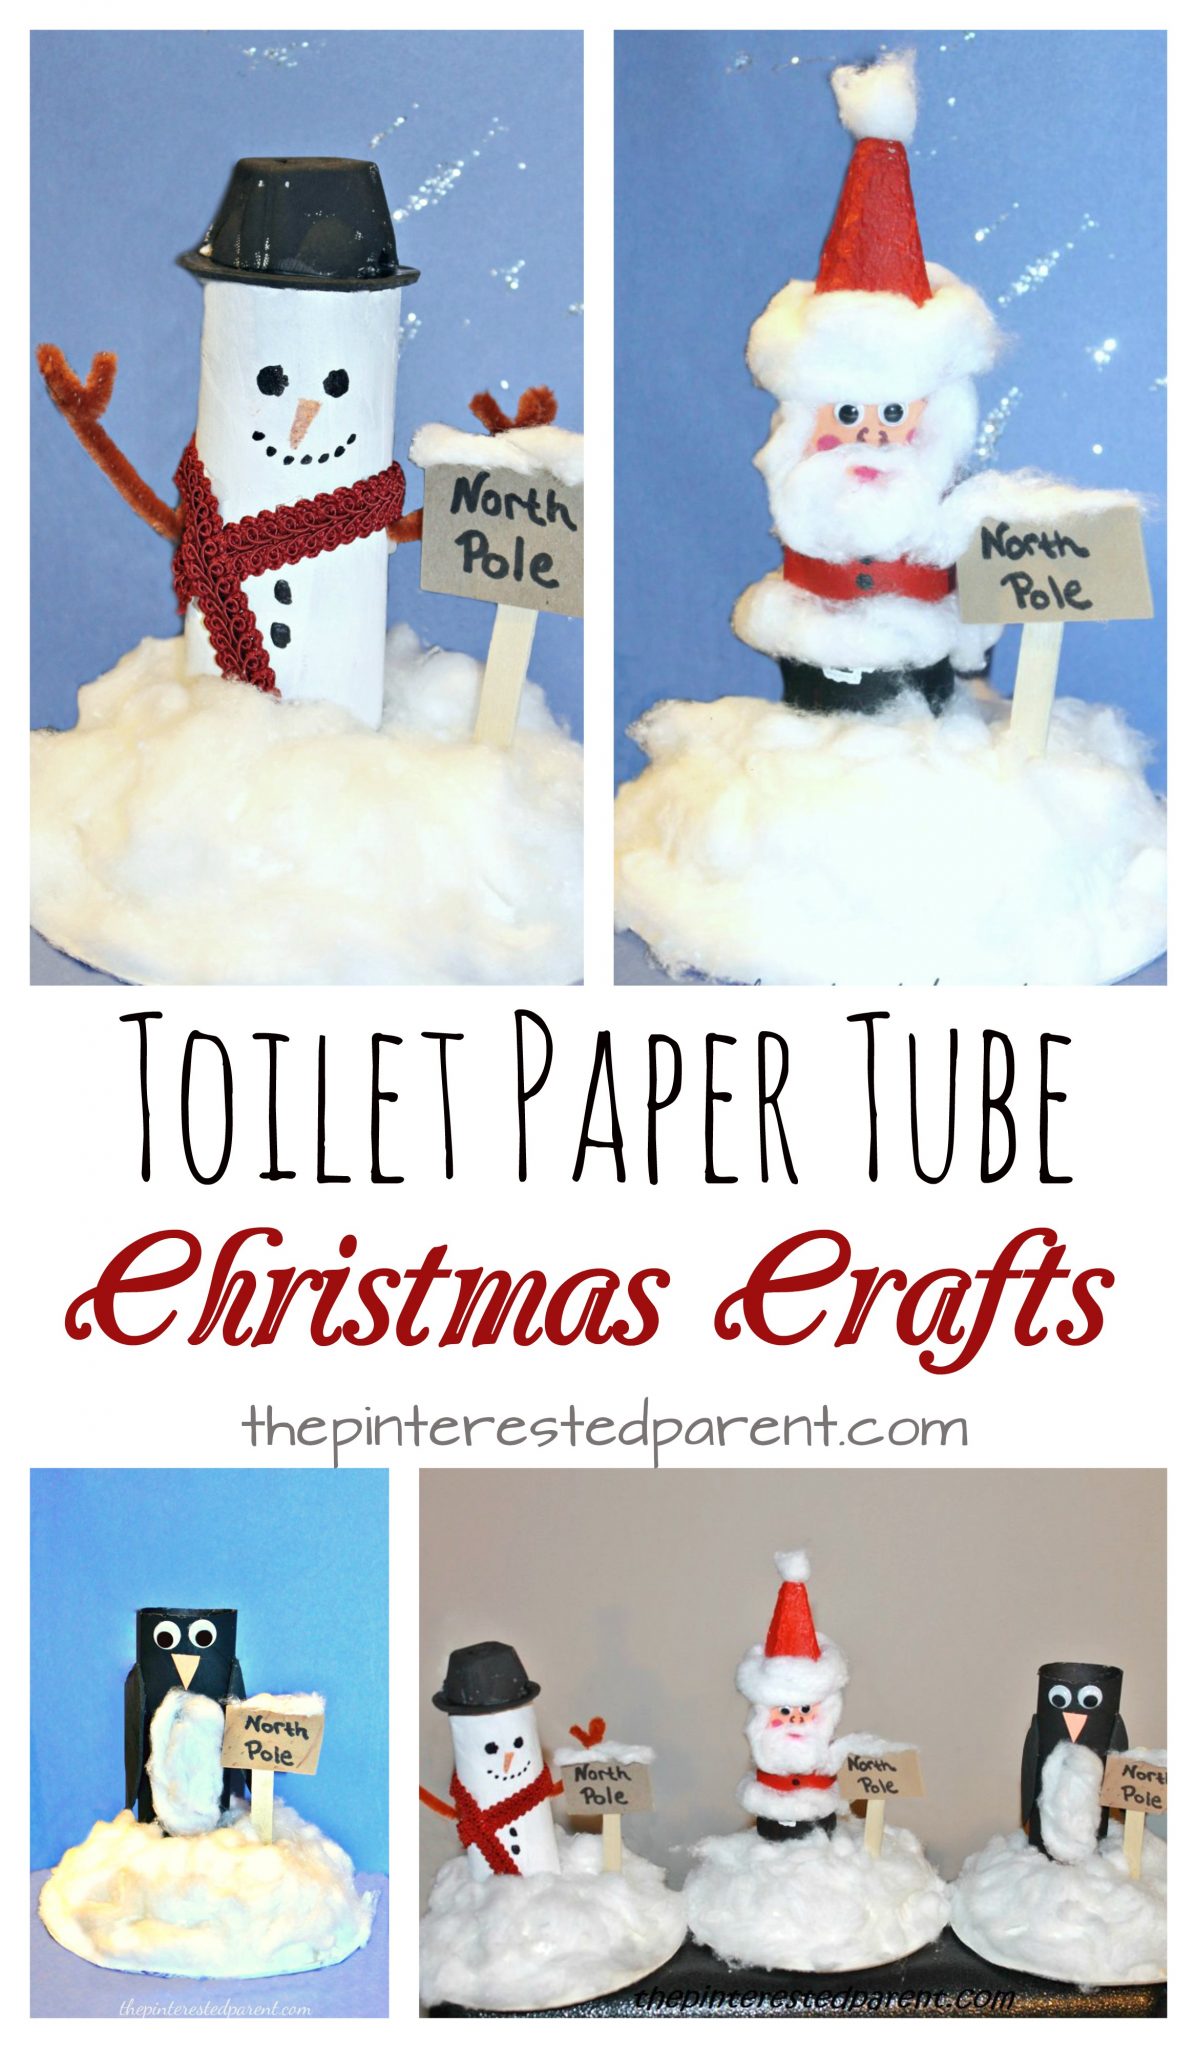 toilet paper tube snowman, Santa, penguin at the North Pole. Recyclable cardboard roll arts & crafts for kids for winter and Christmas